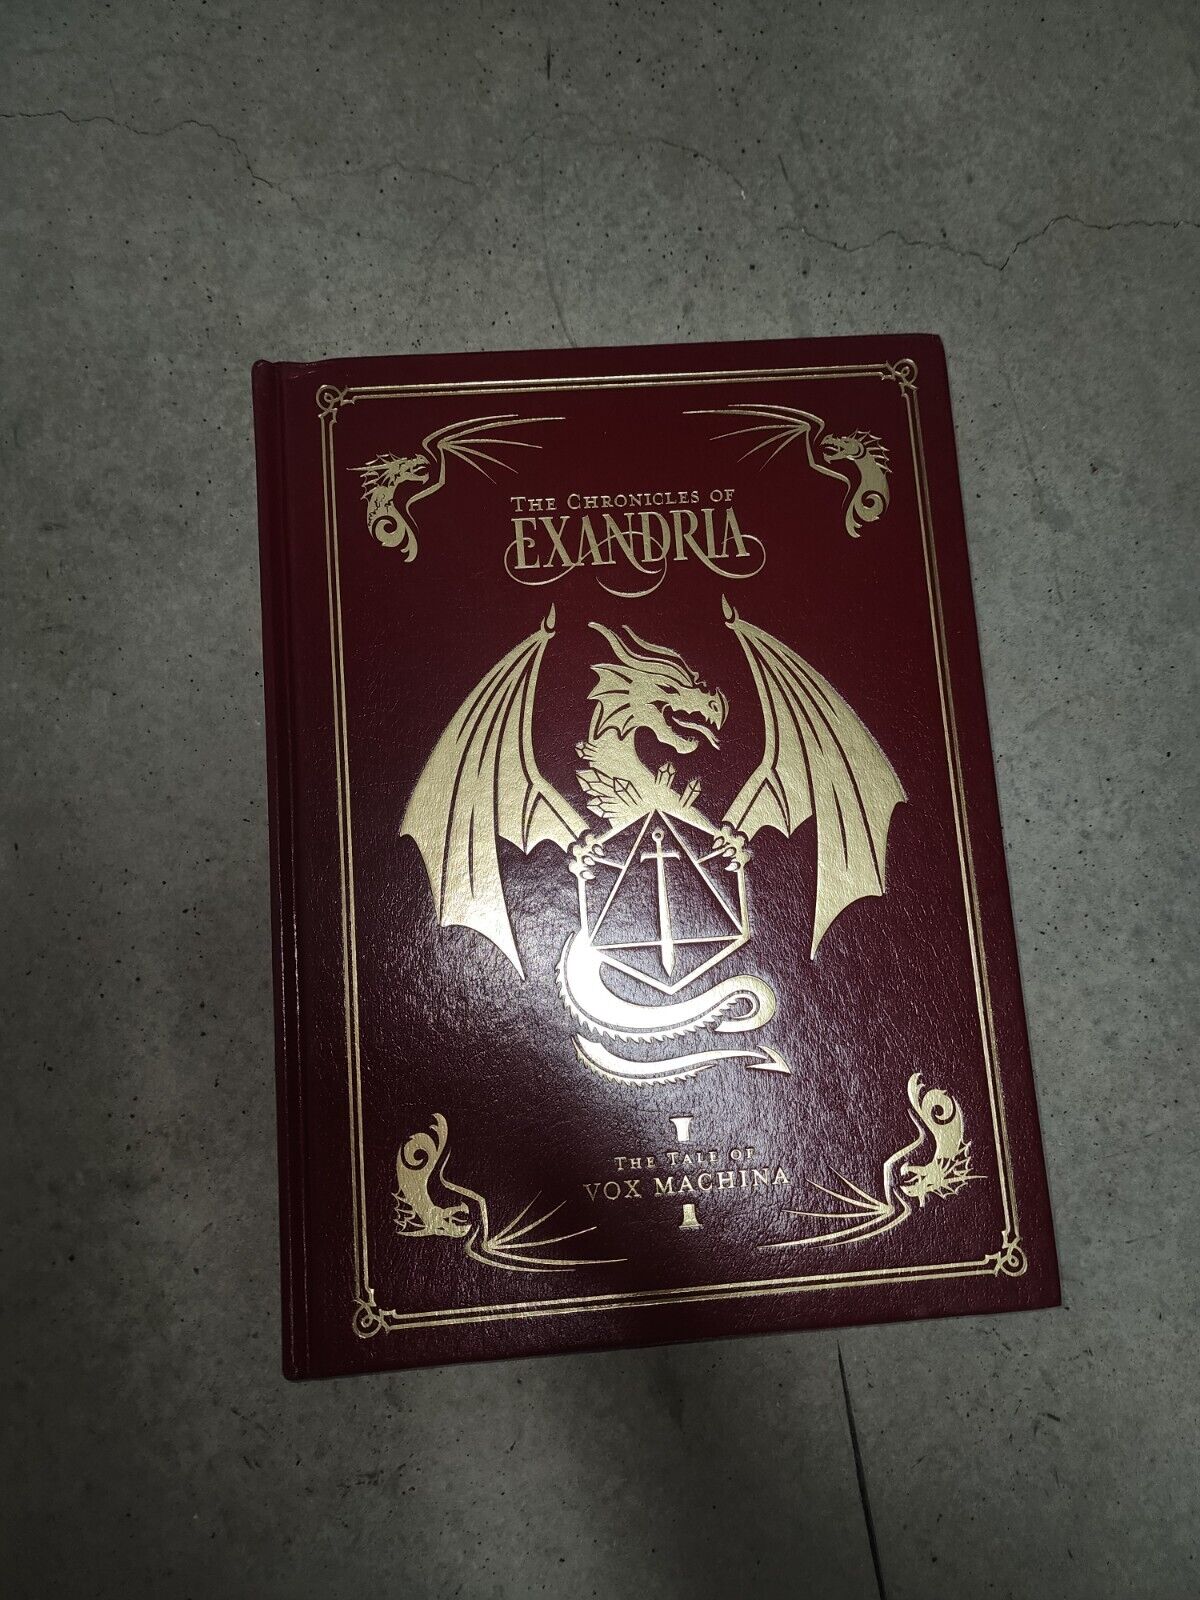 Rare The Chronicles of Exandria Vol. I Deluxe : The Tale of Vox Machina Used